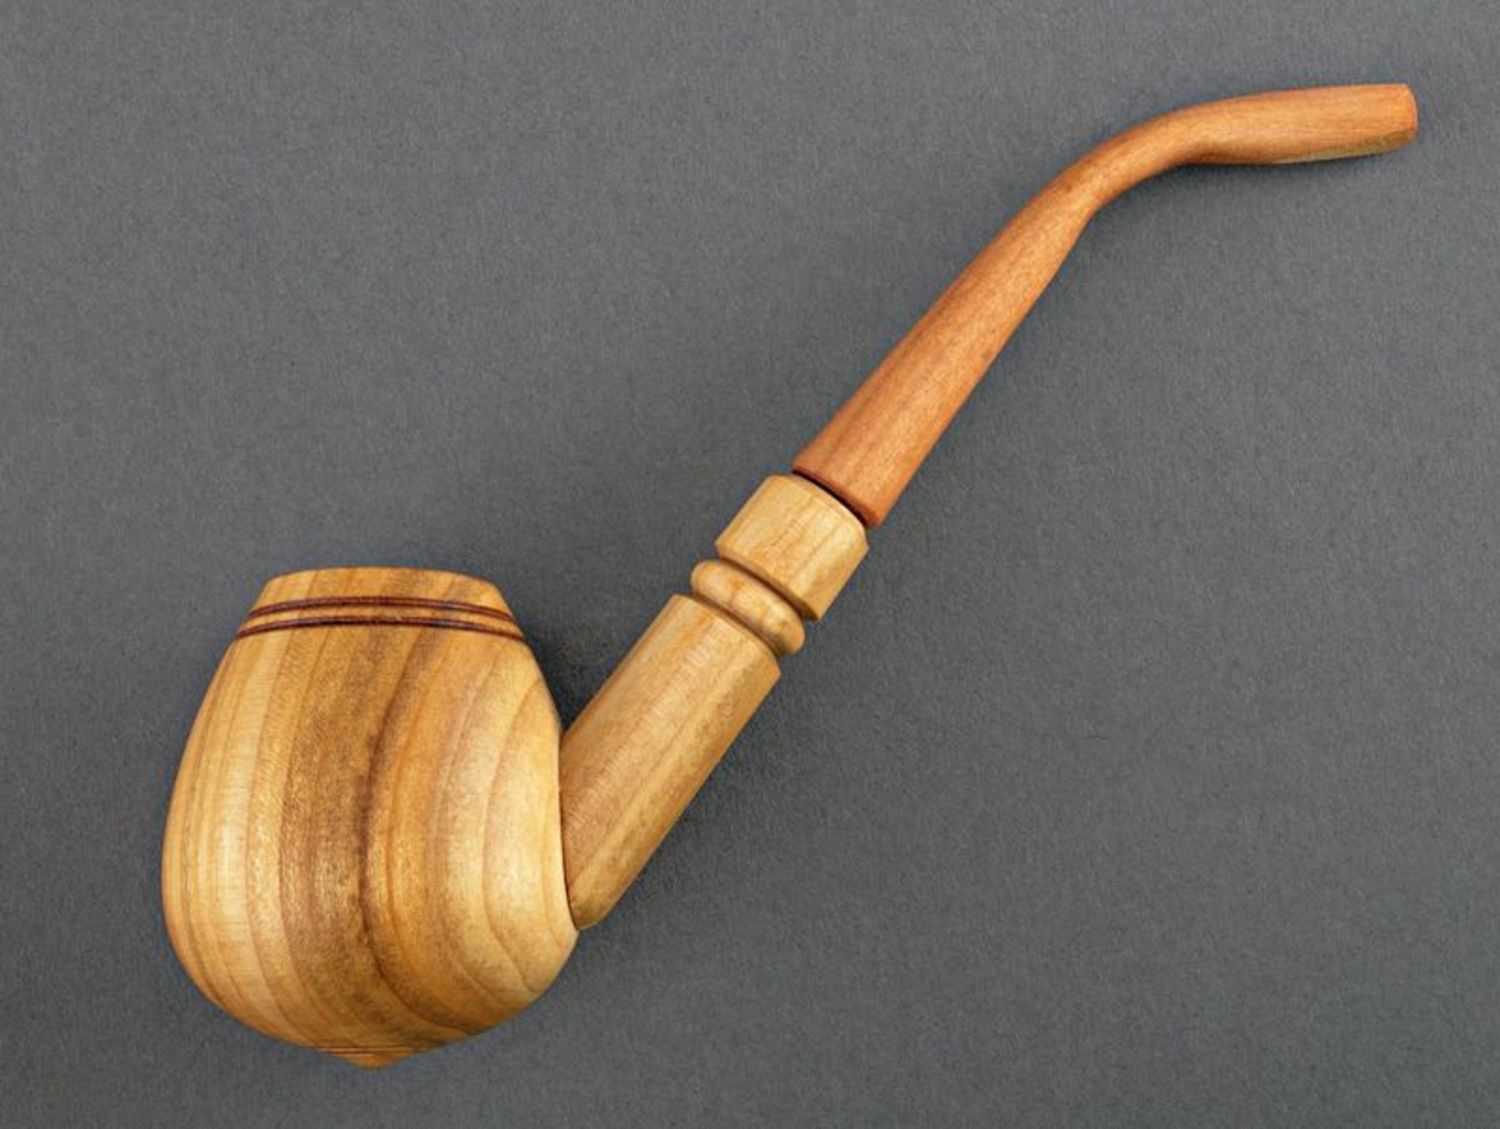 Decorative smoking pipe for decorative use only photo 1